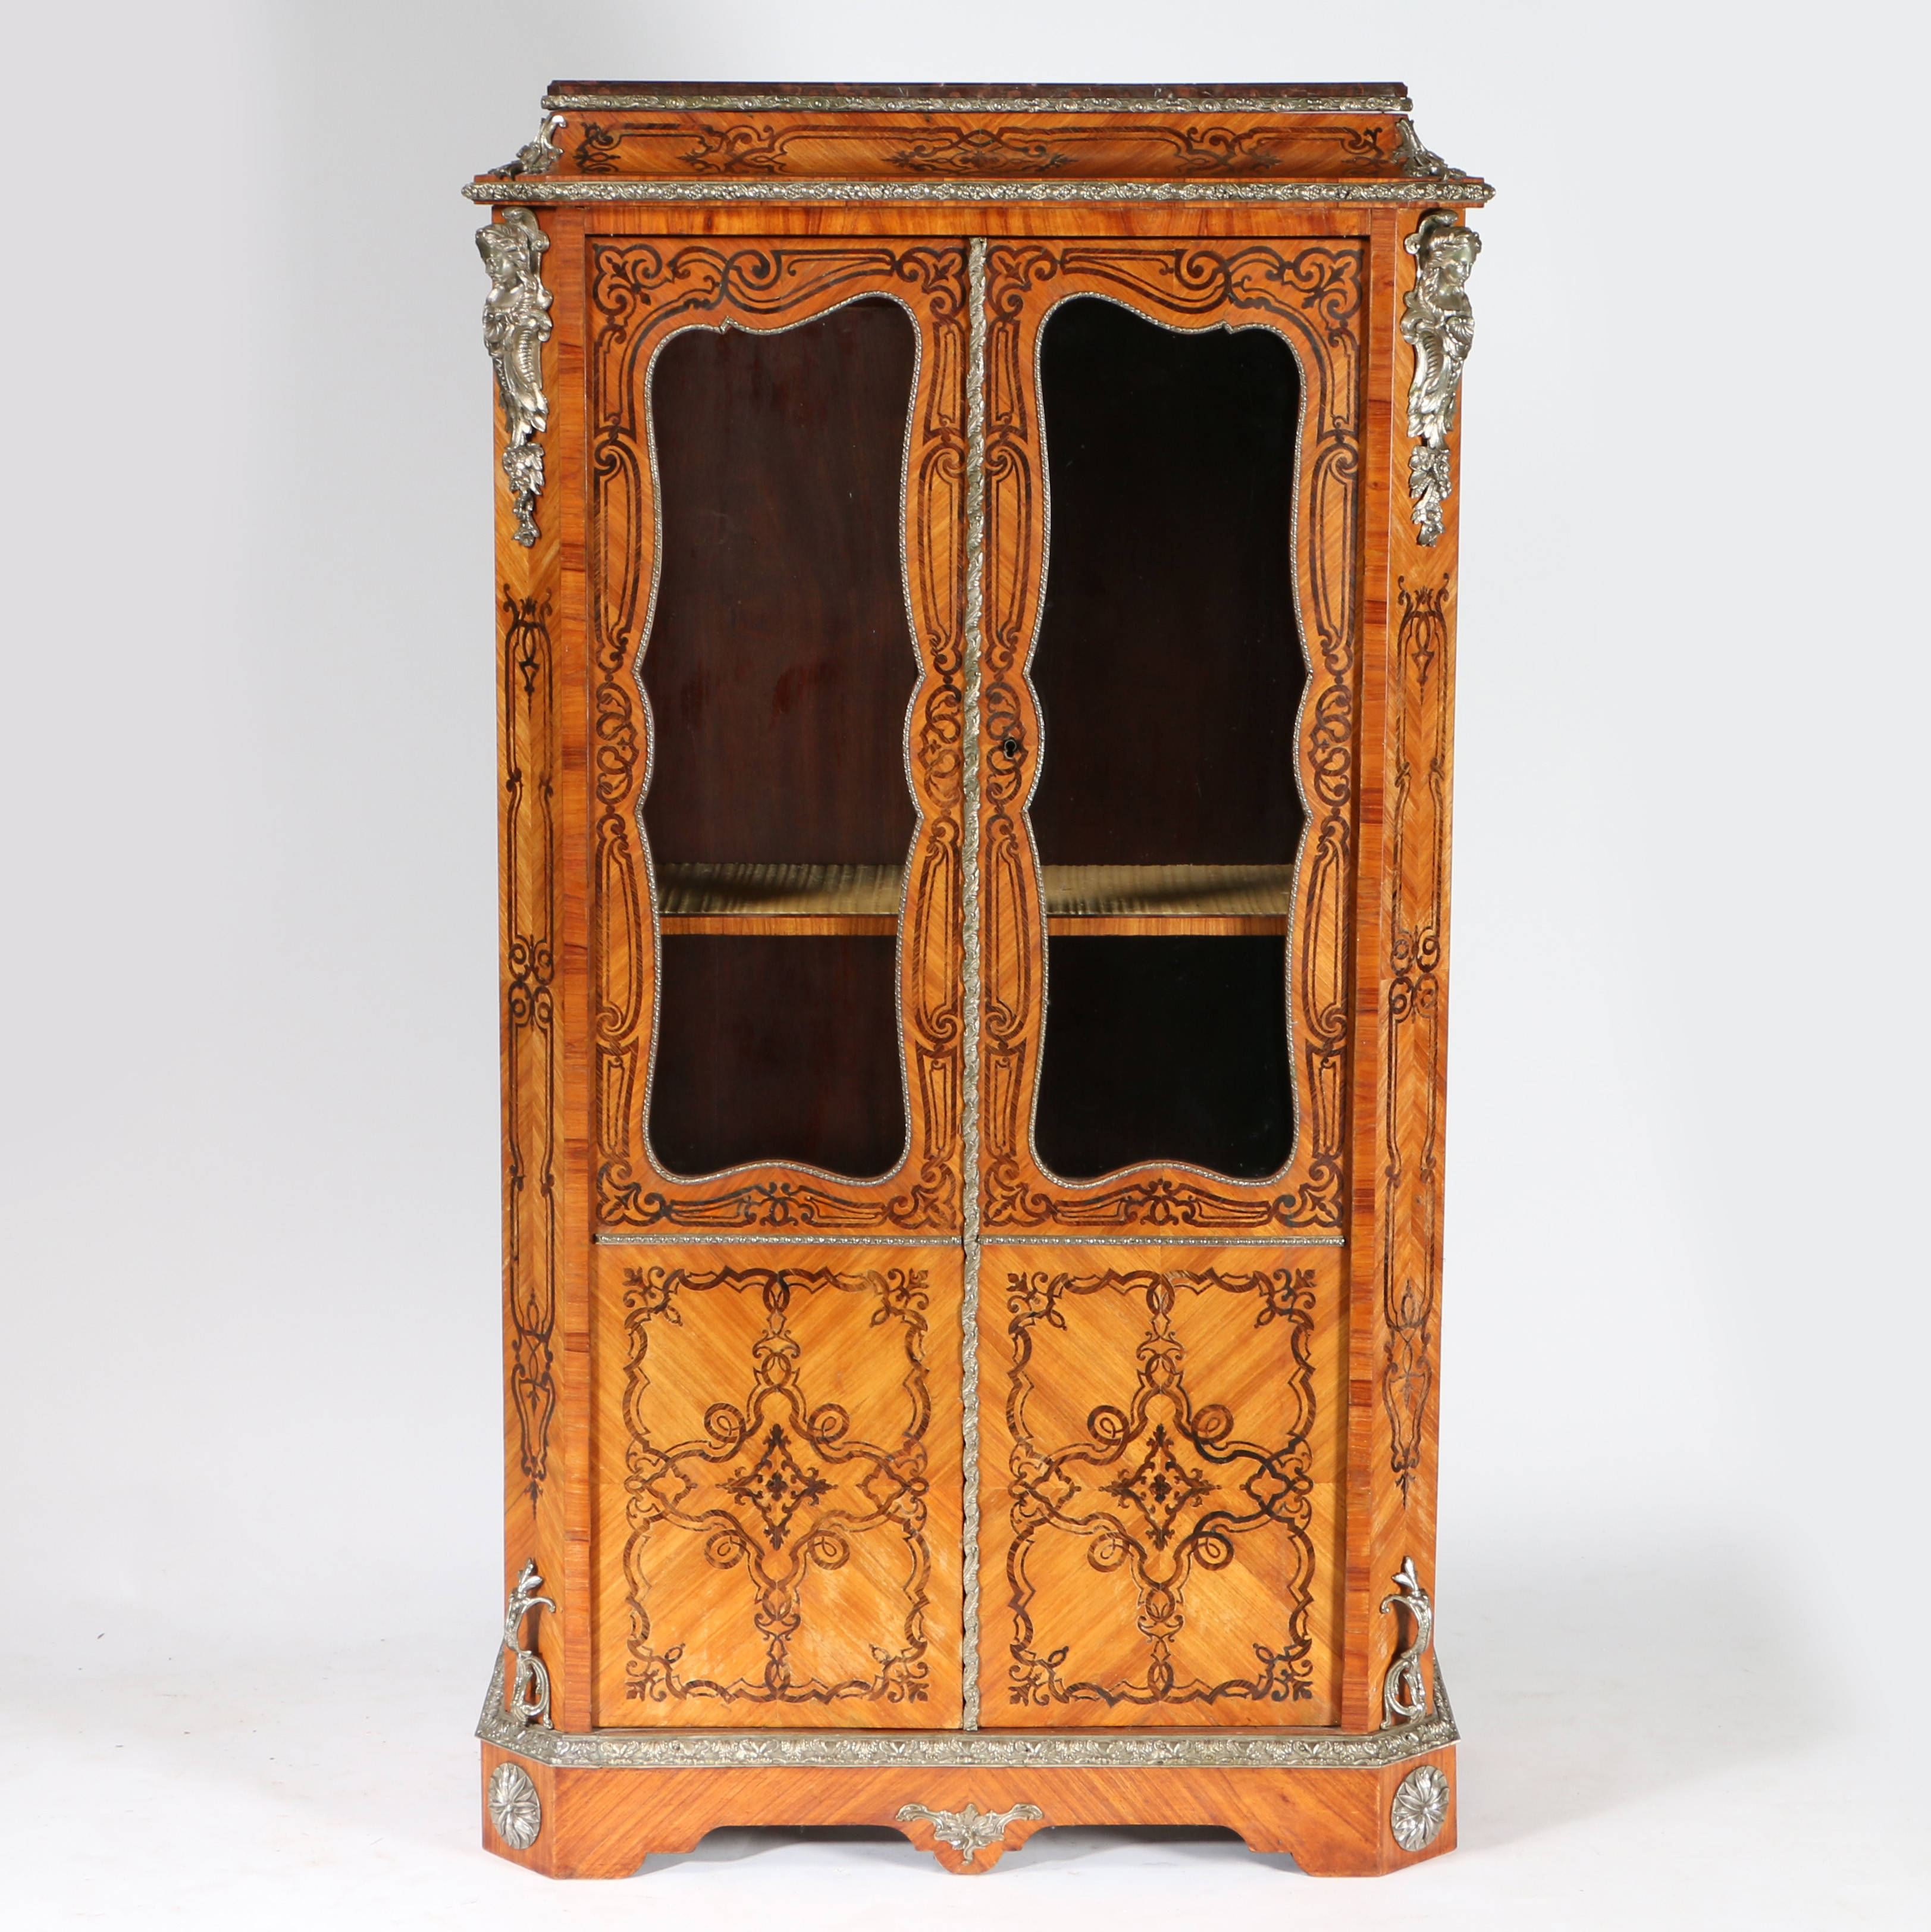 A 19TH CENTURY FRENCH KINGWOOD AND METAL MOUNTED DISPLAY CABINET.